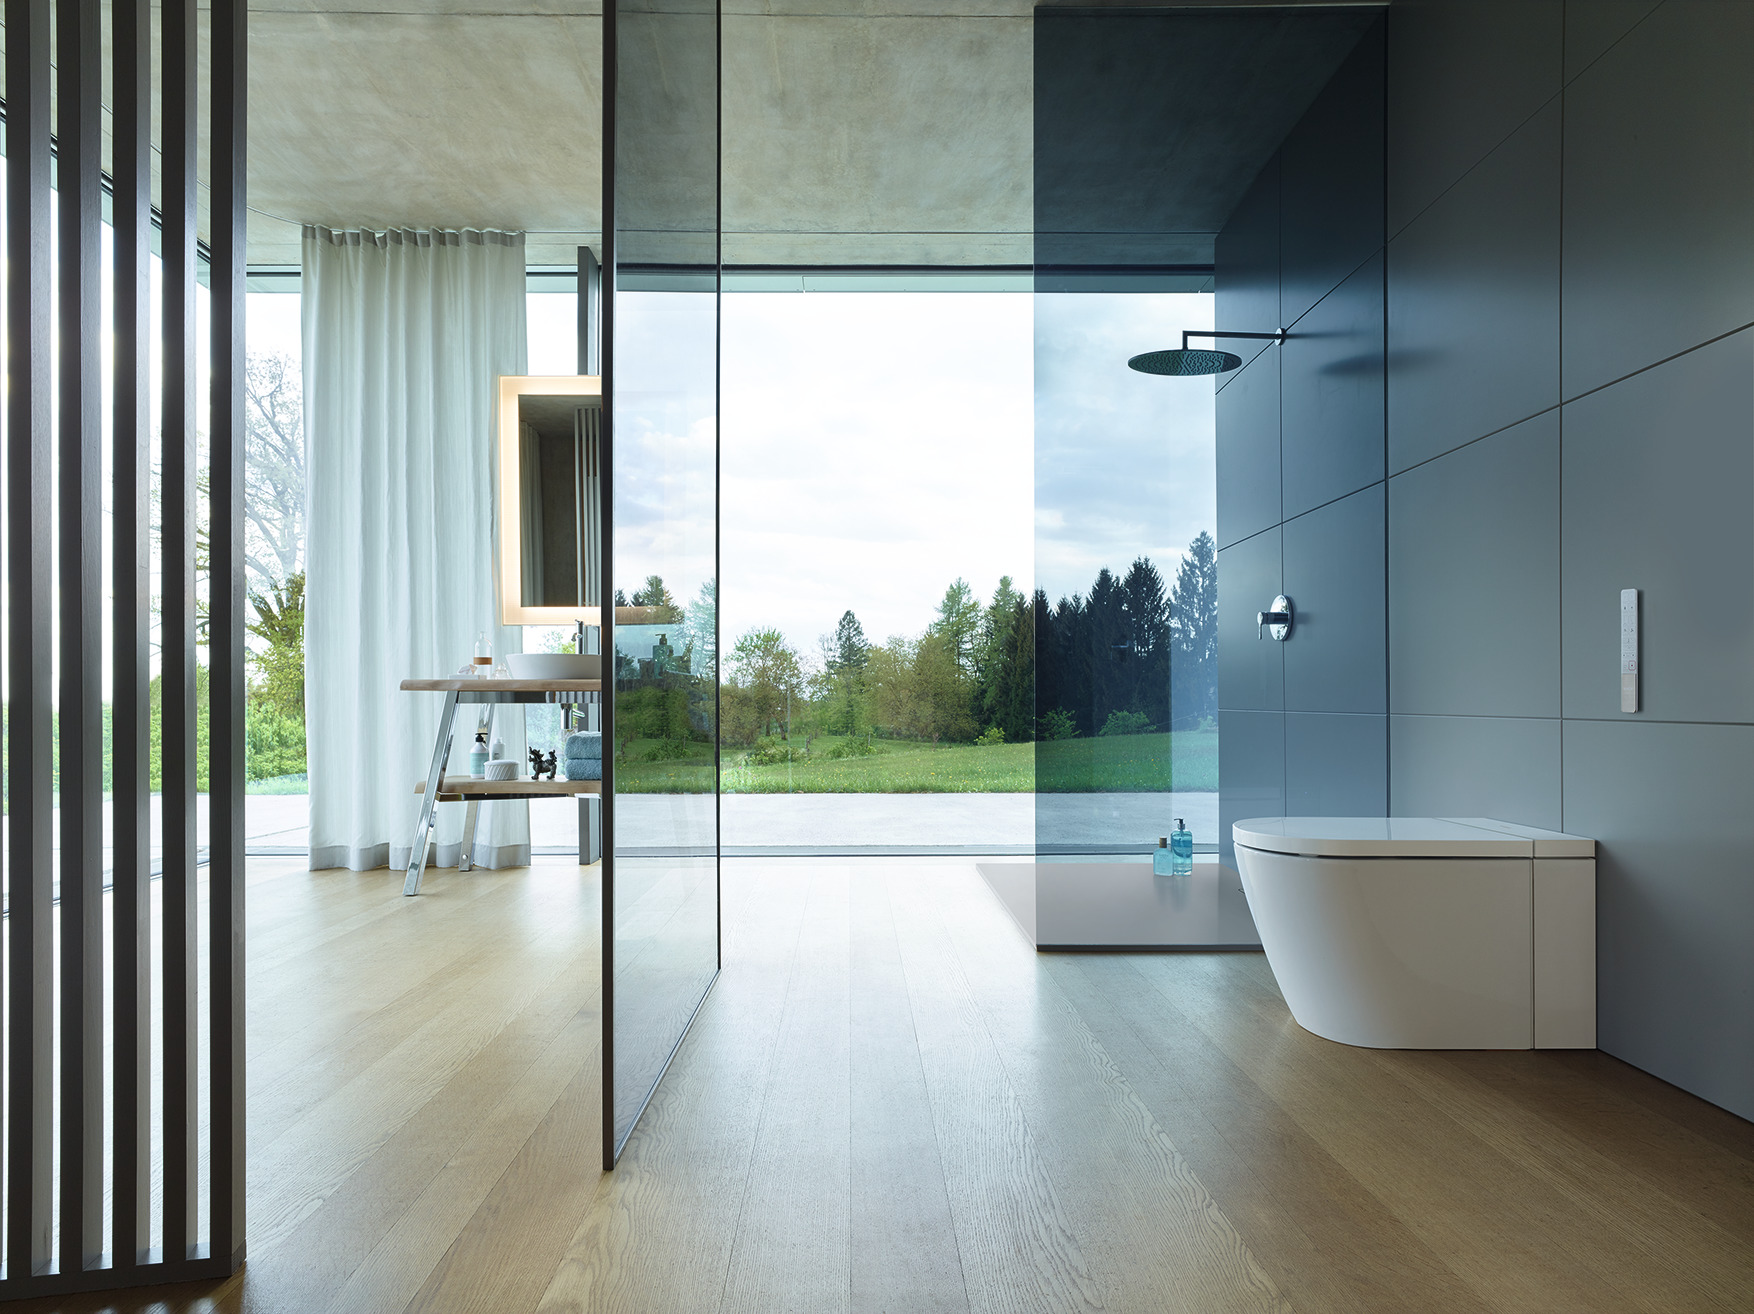 Clear glass partitions in front of a toilet, a 2020 best of products awards winner